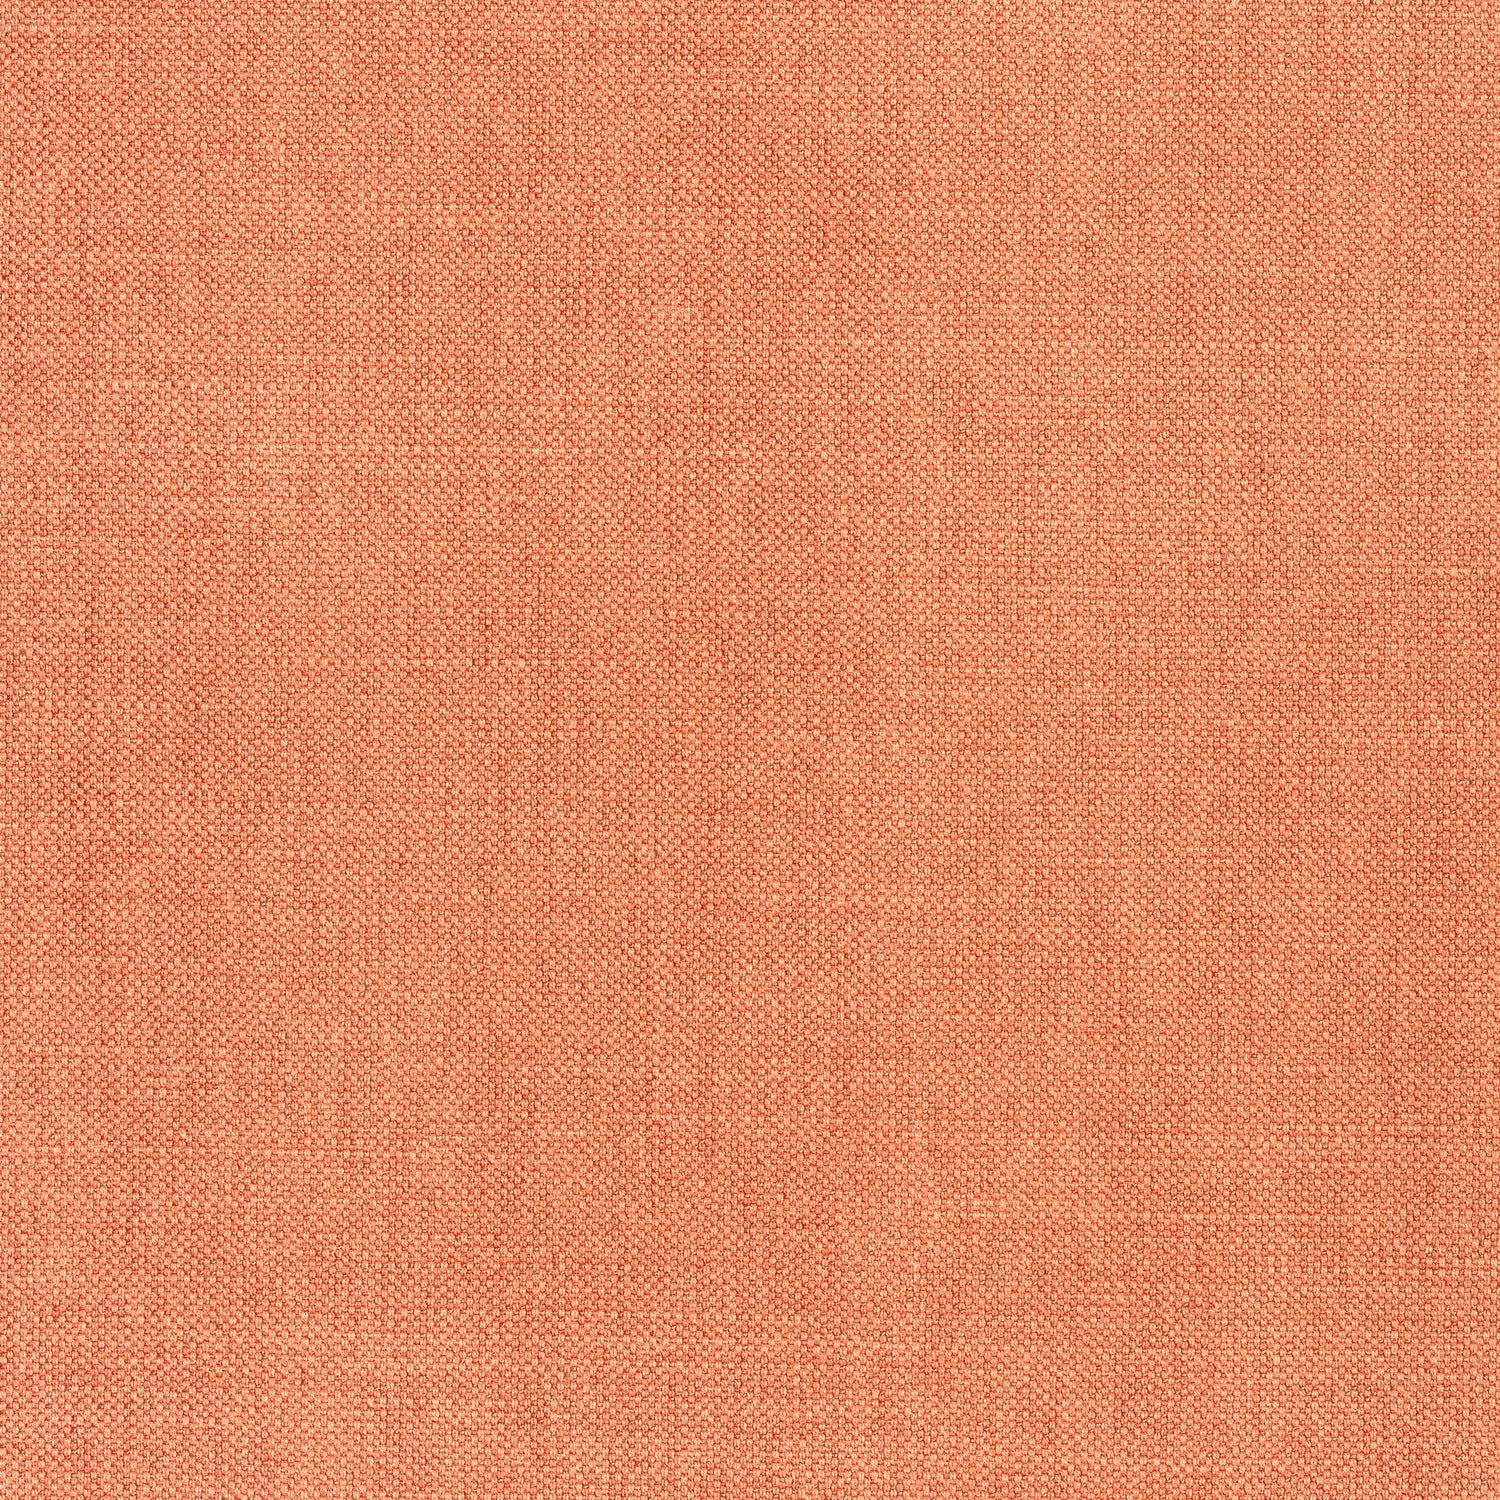 Prisma fabric in mandarin color - pattern number W70124 - by Thibaut in the Woven Resource Vol 12 Prisma Fabrics collection